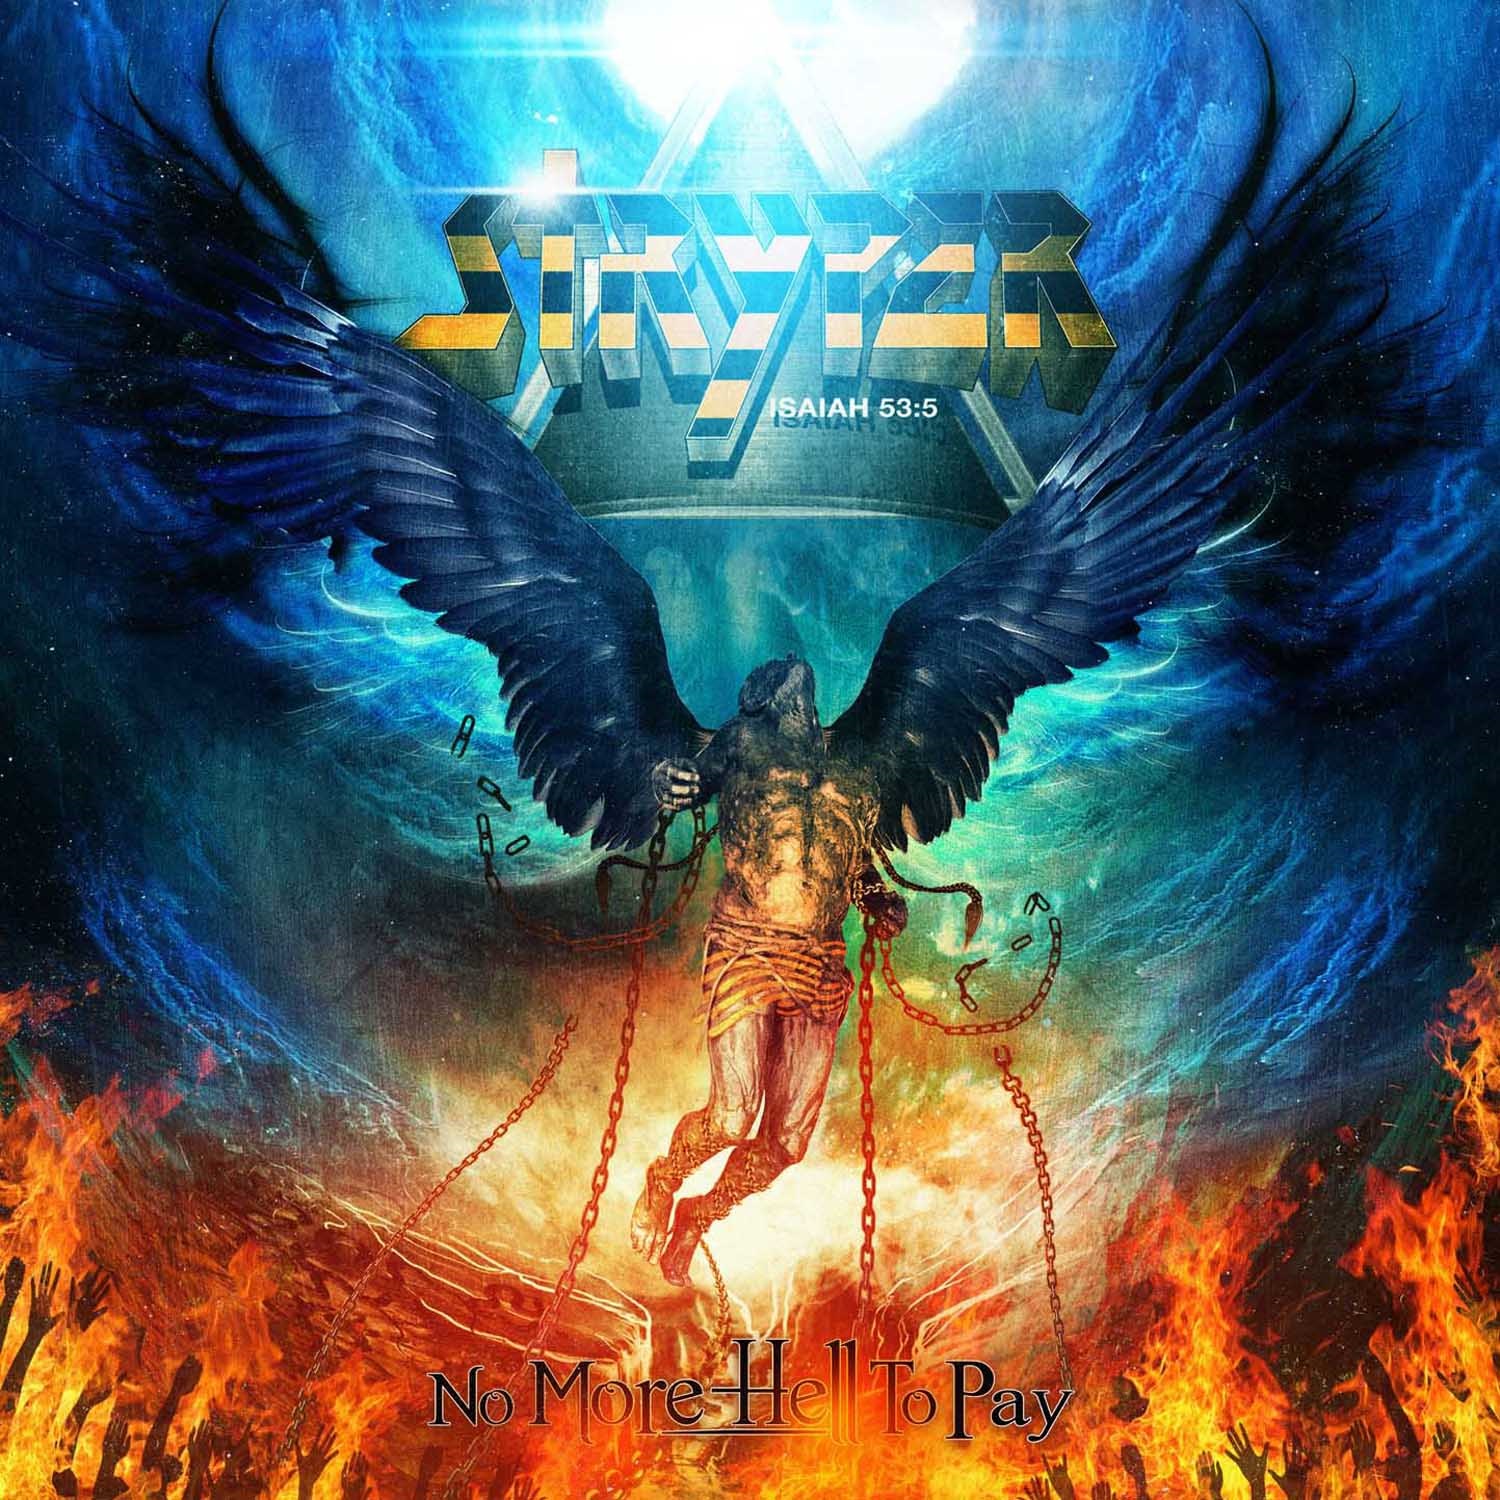 STRYPER - No More Hell to Pay (Deluxe Edition)